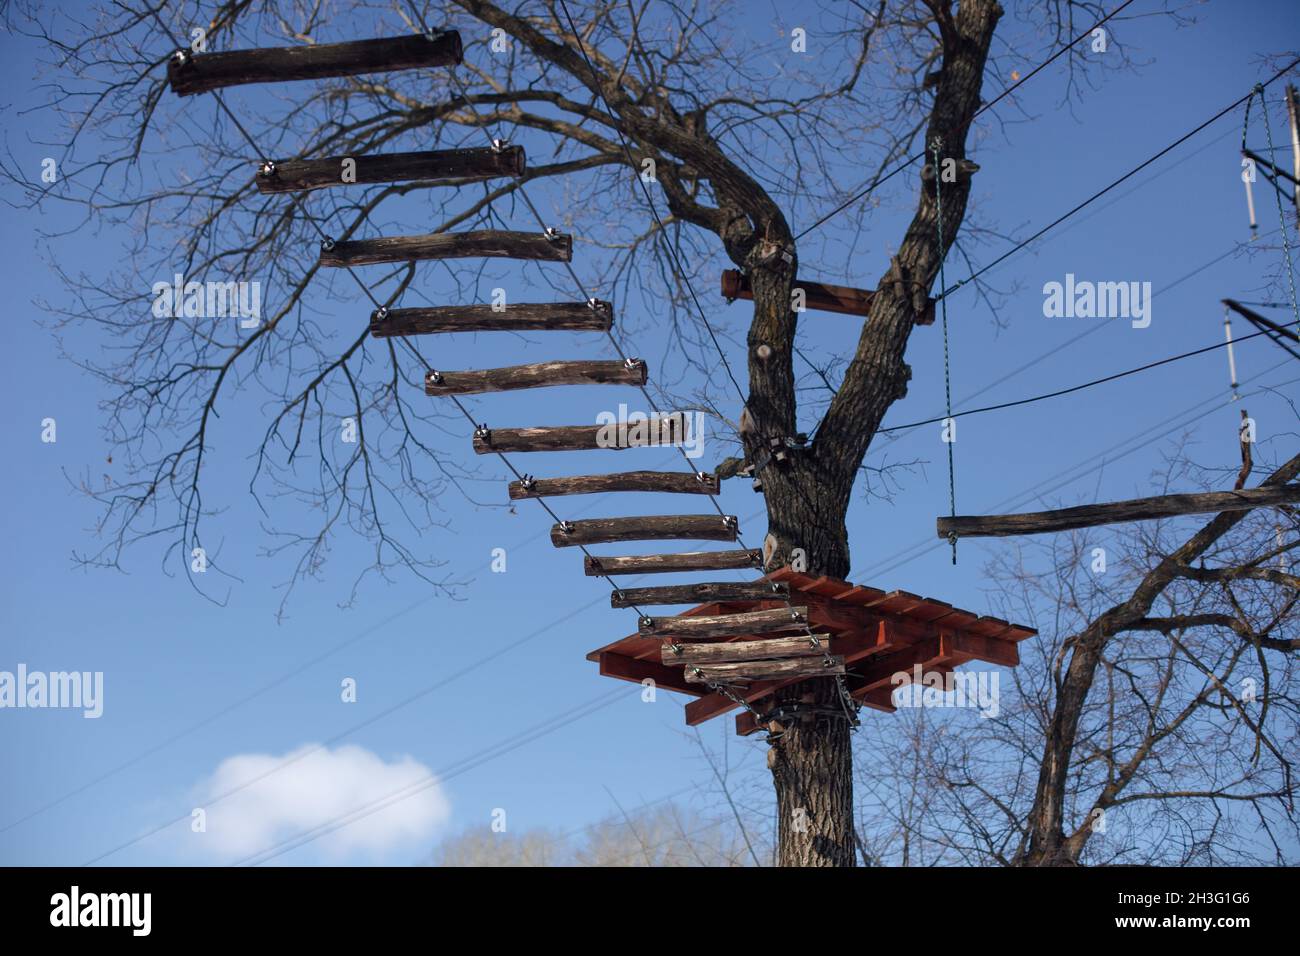 Suspended wooden staircase. ladder in form of bridge is suspended between trees against blue sky, children's attraction in forest Stock Photo